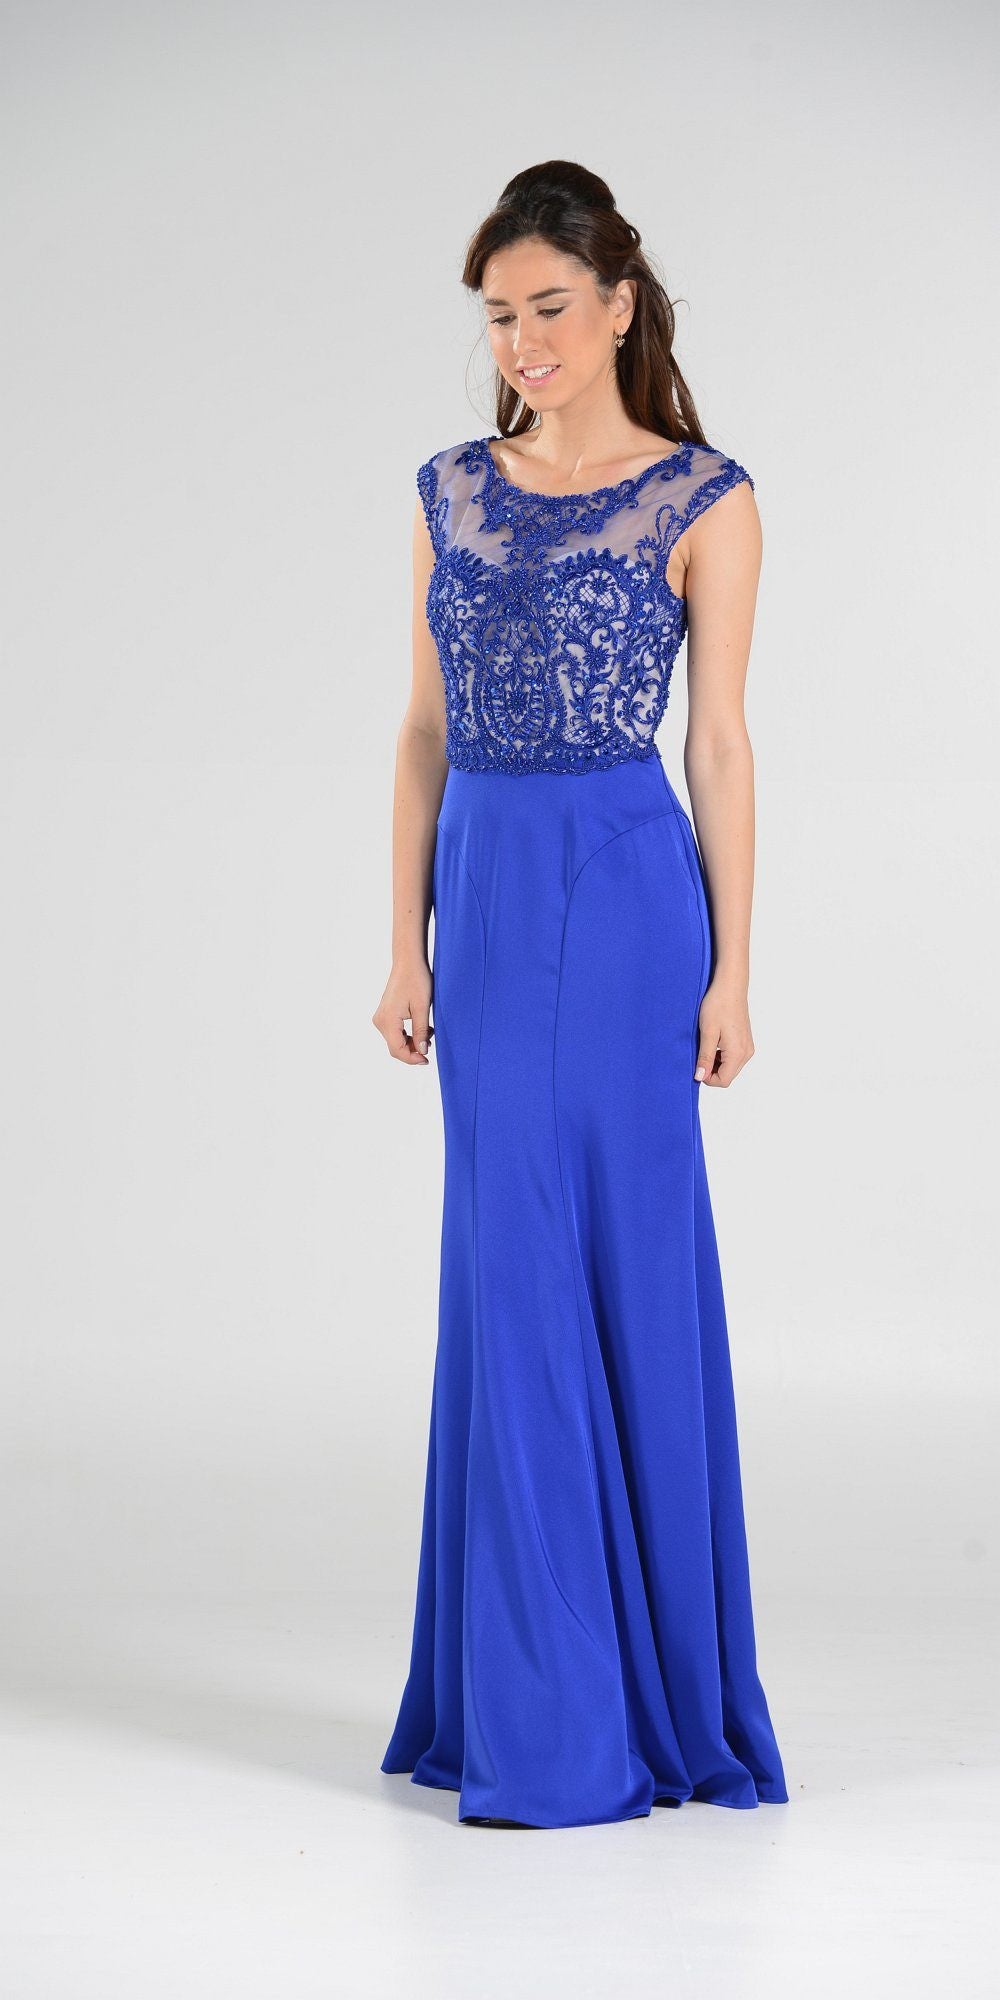 Scoop Neck Appliqued Bodice Fit and Flare Prom Gown Royal Blue Cap Sleeves